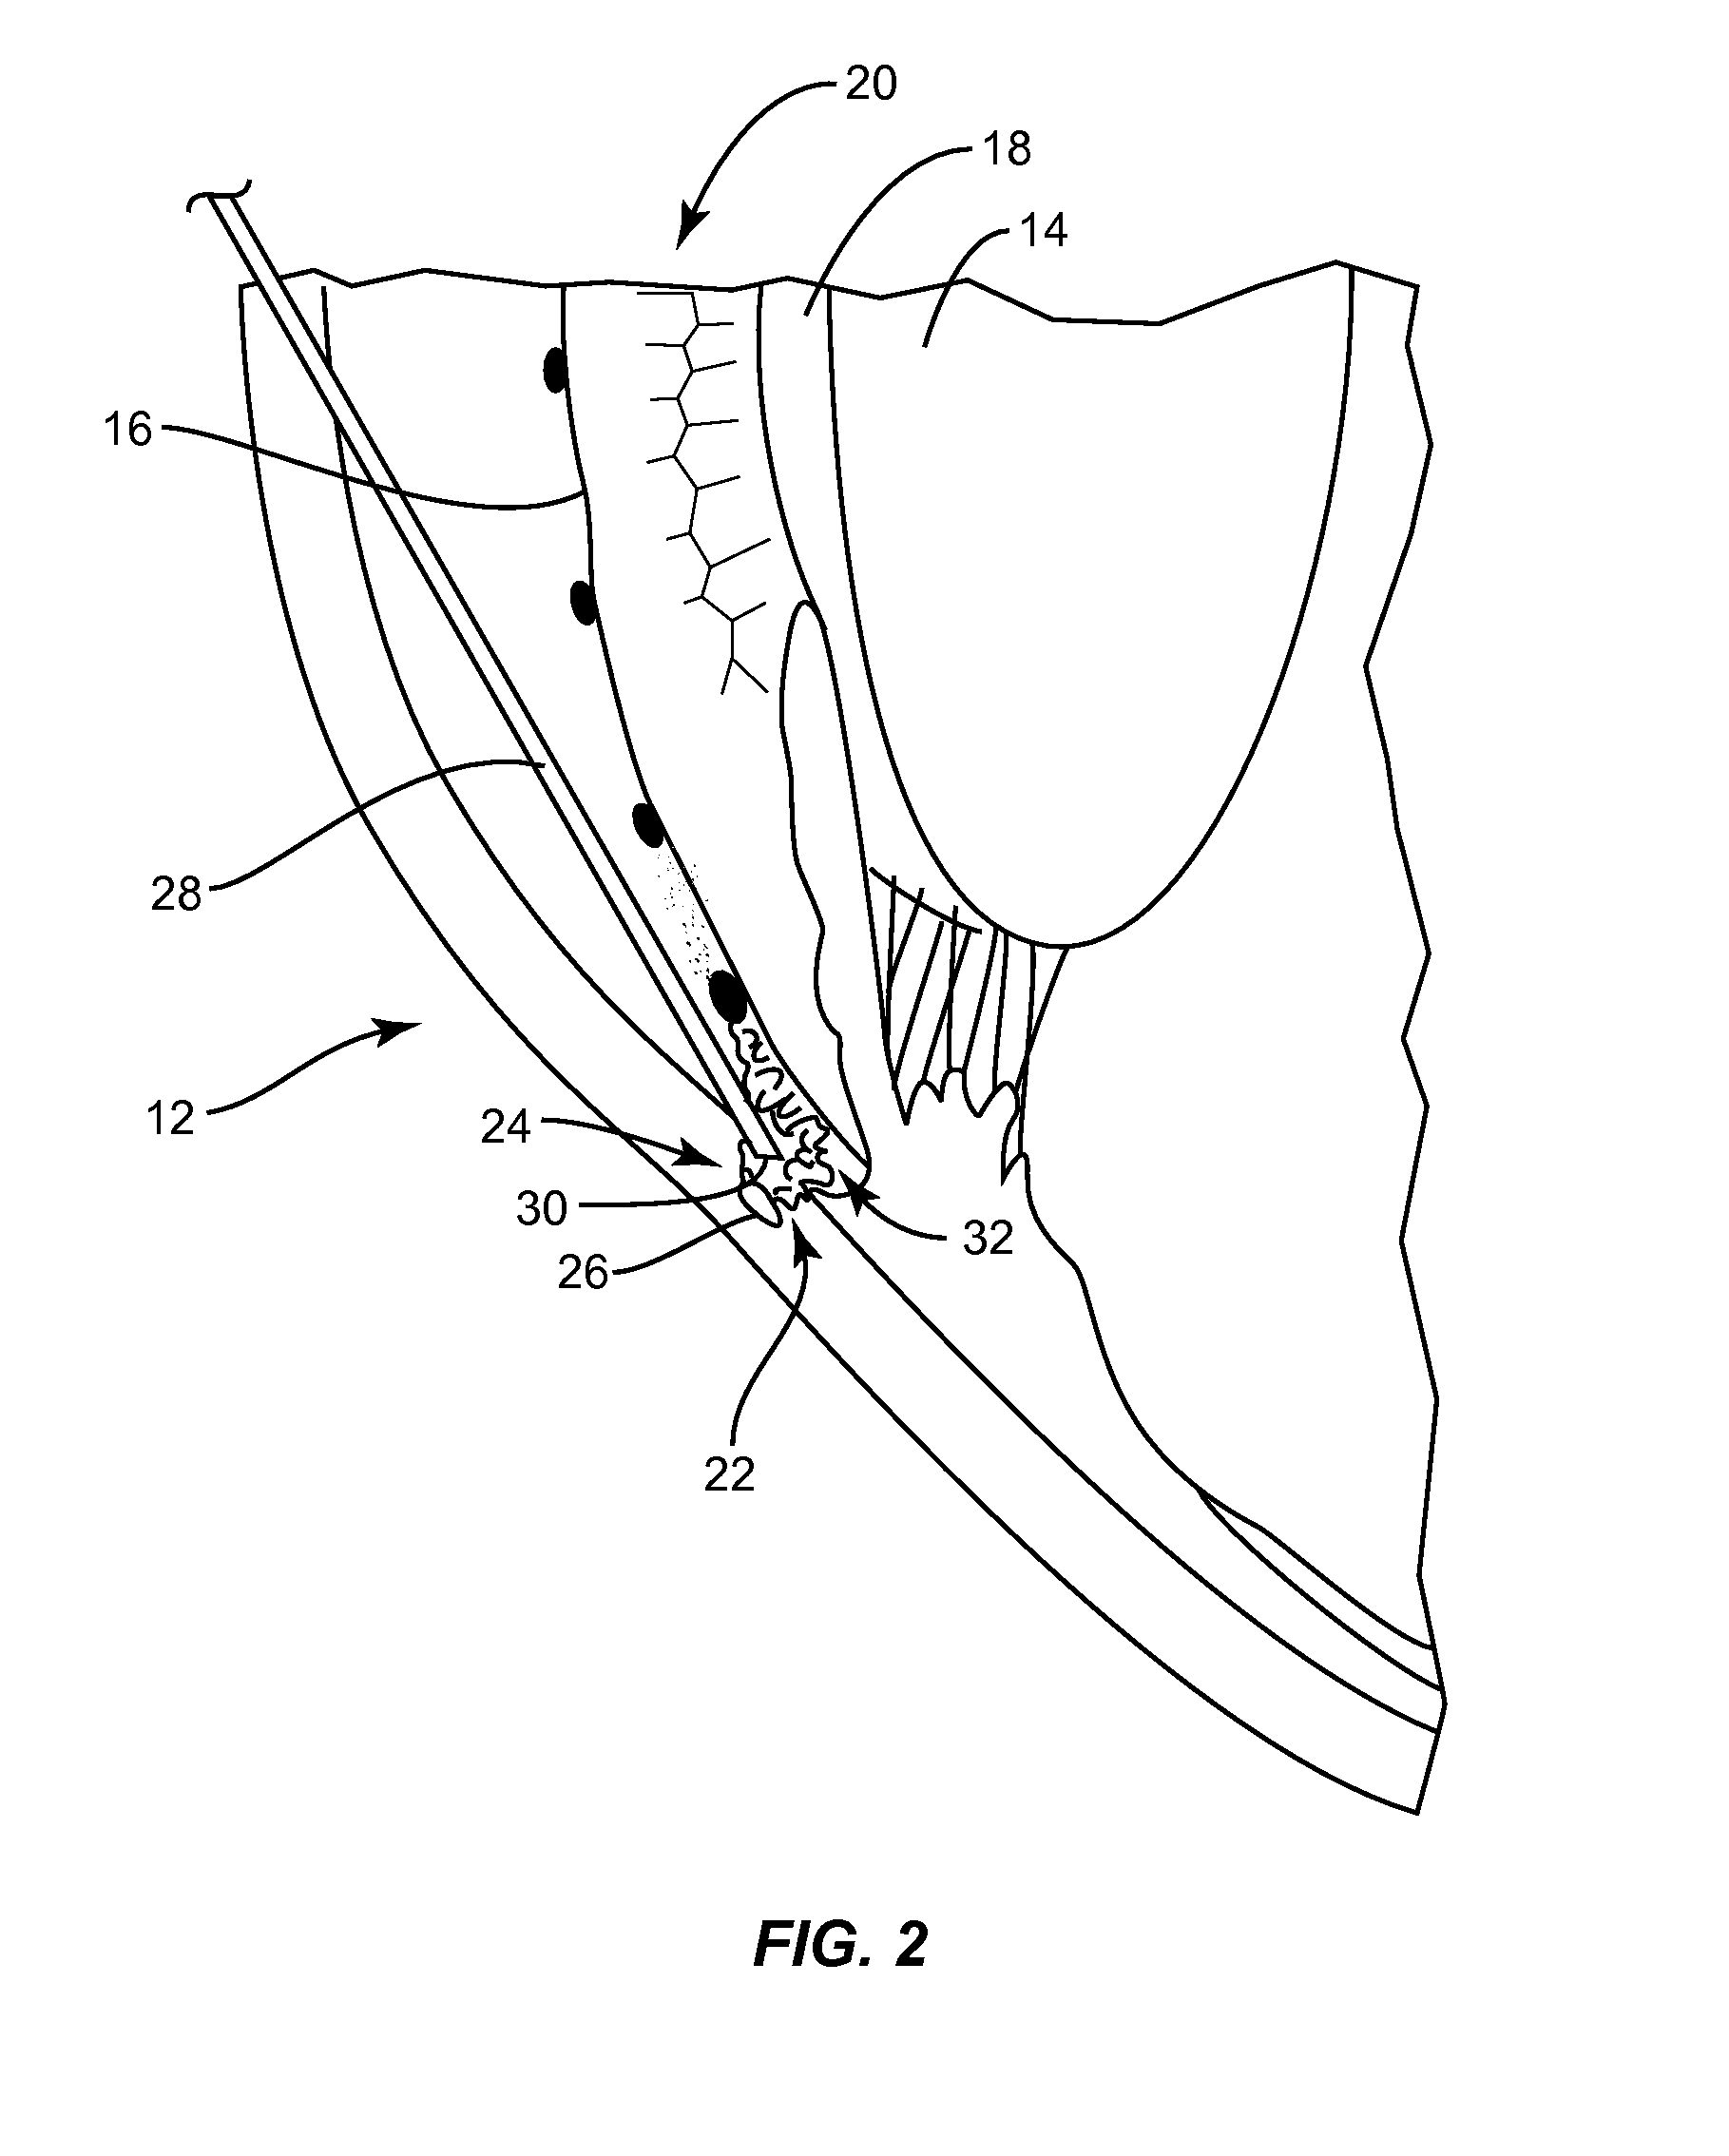 Methods, apparatuses, and systems for reducing intraocular pressure as a means of preventing or treating open-angle glaucoma